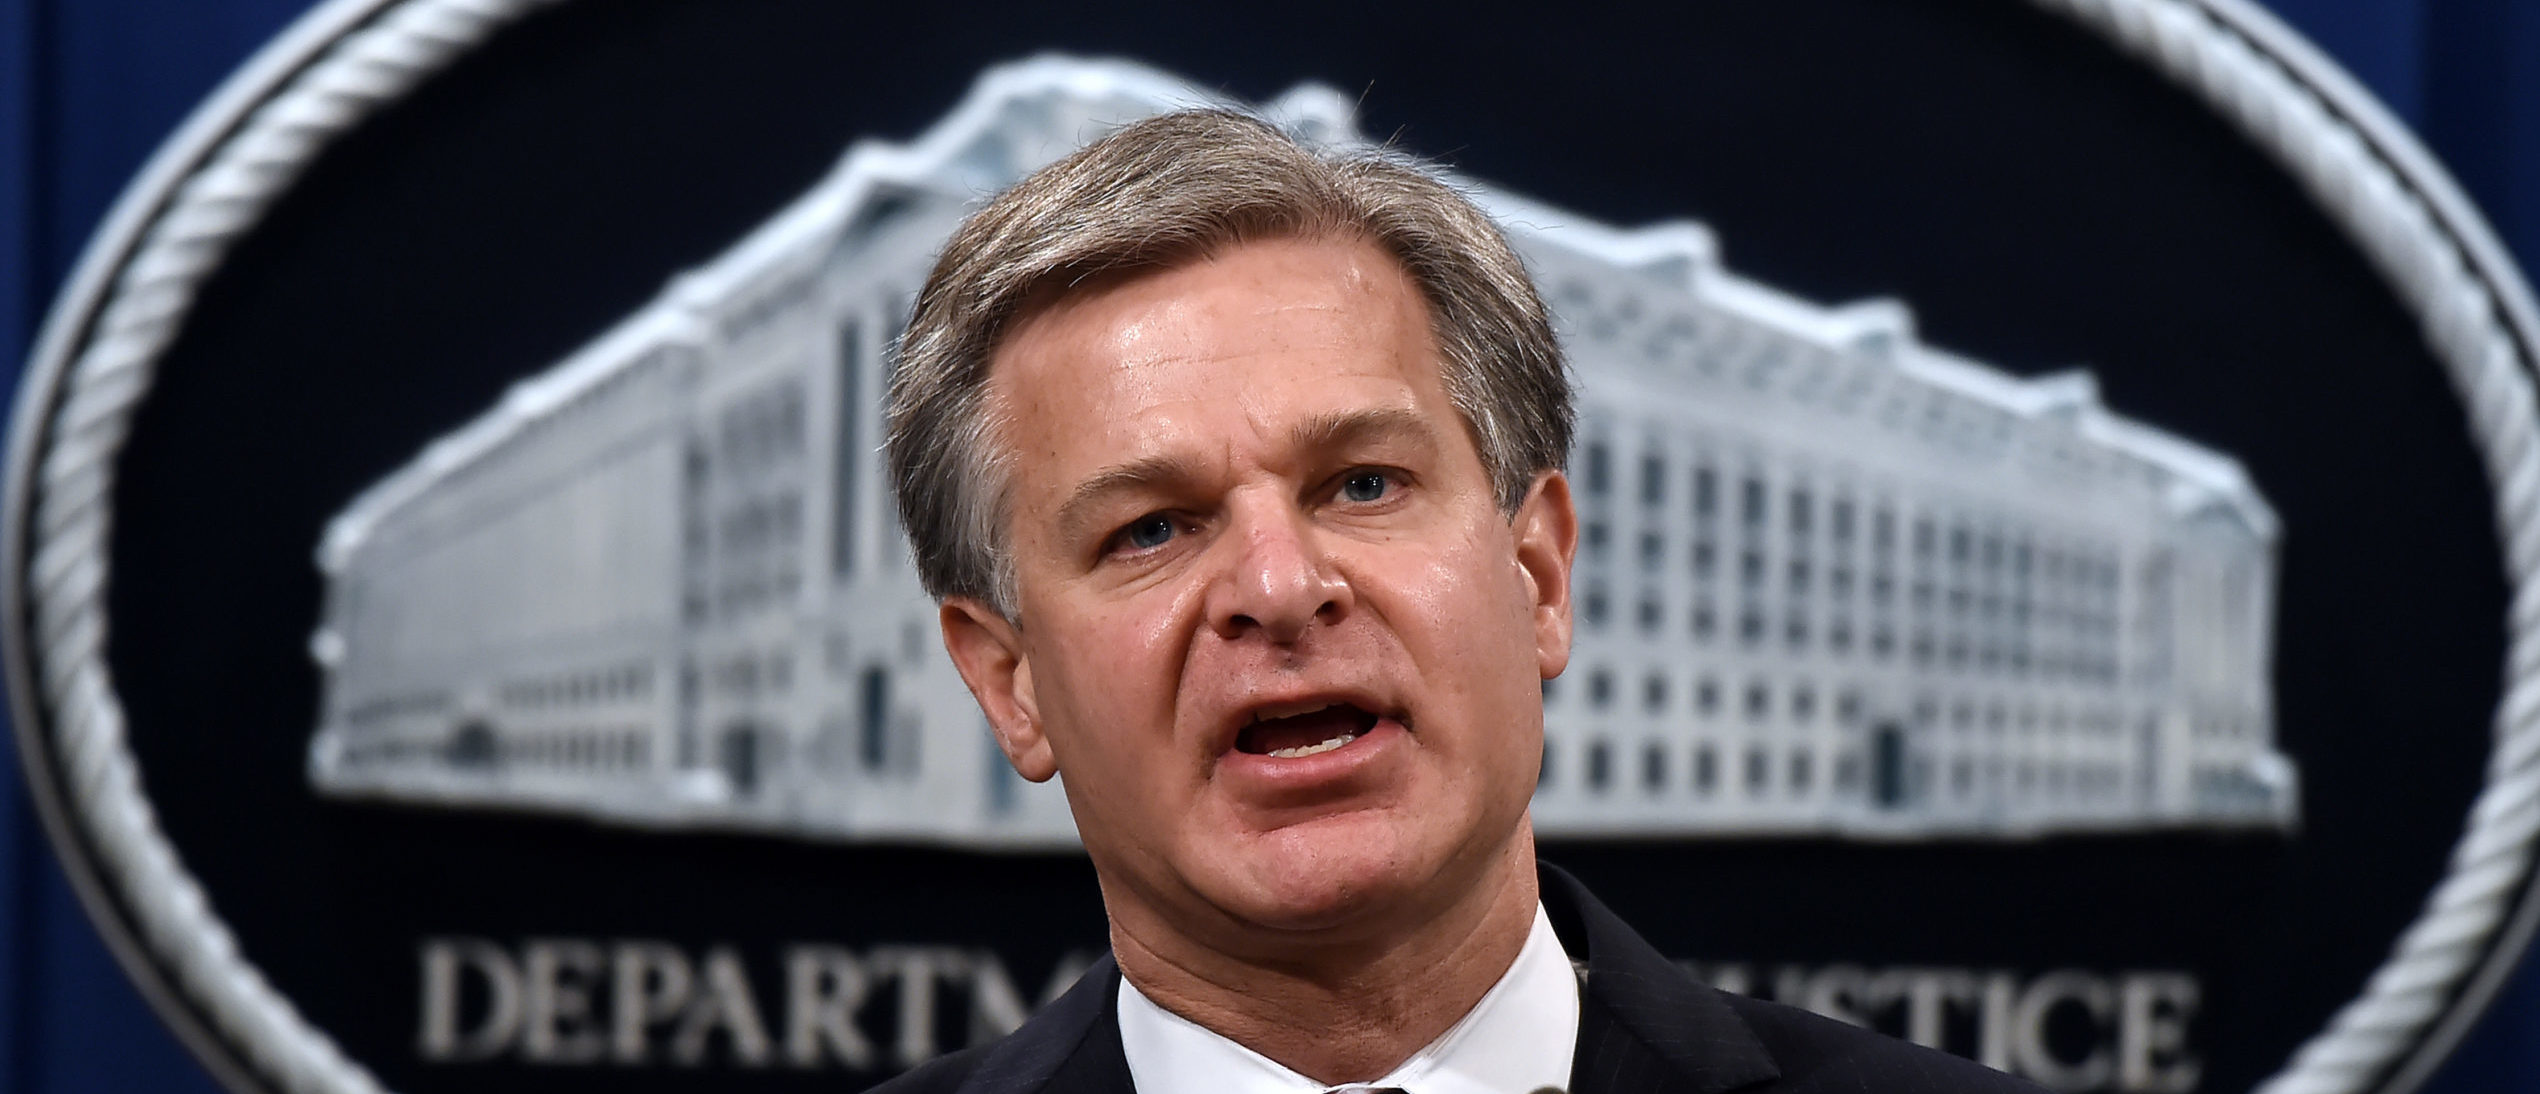 Federal Bureau of Investigation Director Christopher Wray announces significant law enforcement actions related to the illegal sale of drugs and other illicit goods and services on the Darknet during a press conference at the Department of Justice September 22, 2020 in Washington, DC. (Photo by Olivier DOULIERY / POOL / AFP) (Photo by OLIVIER DOULIERY/POOL/AFP via Getty Images)